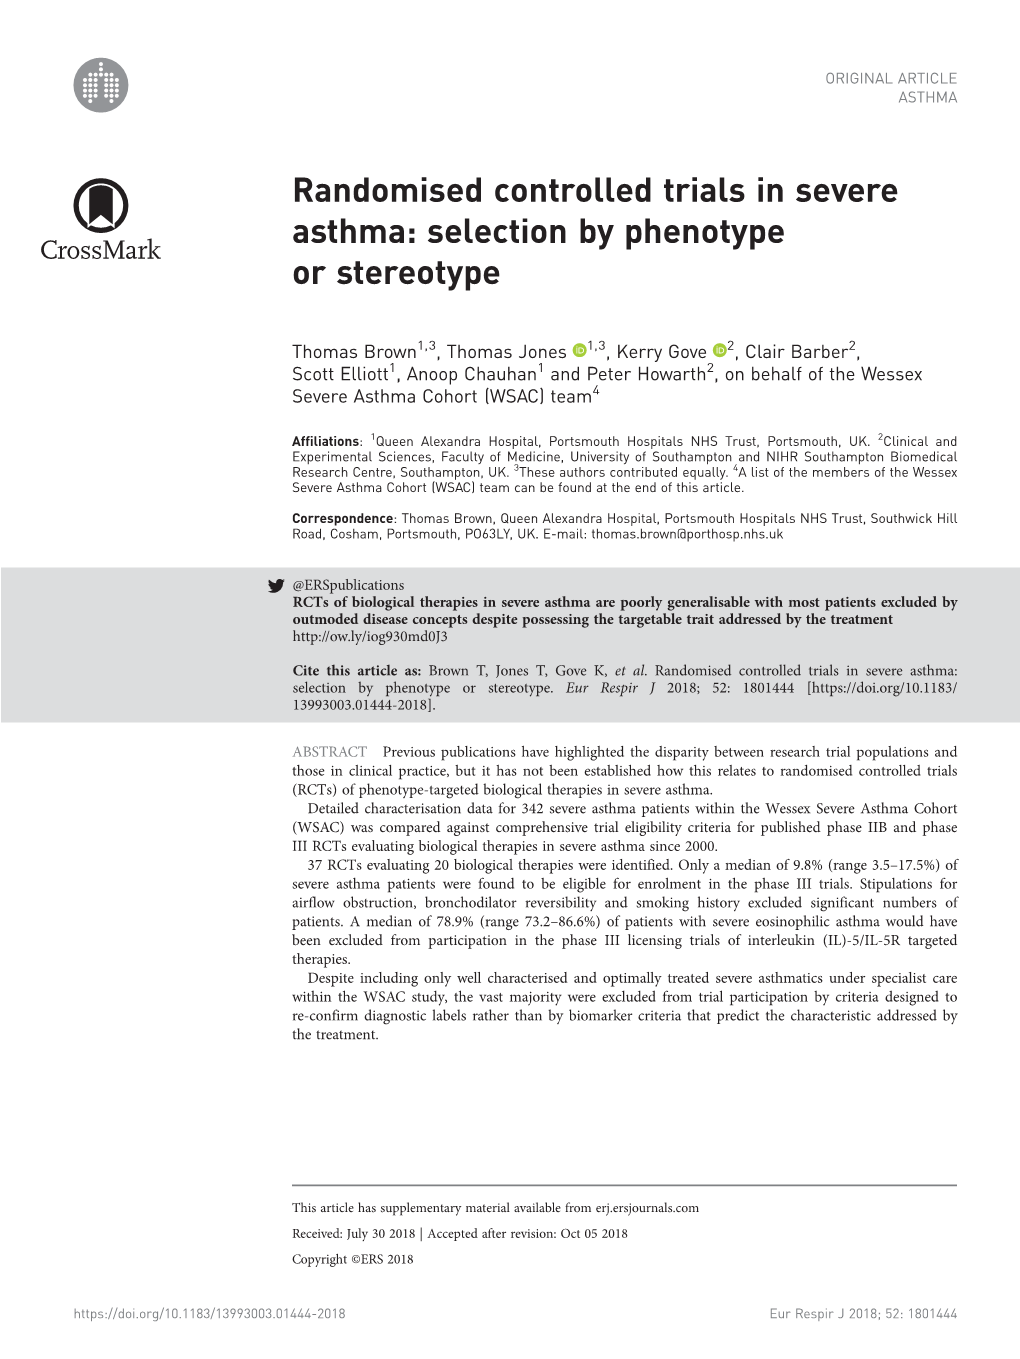 Randomised Controlled Trials in Severe Asthma: Selection by Phenotype Or Stereotype